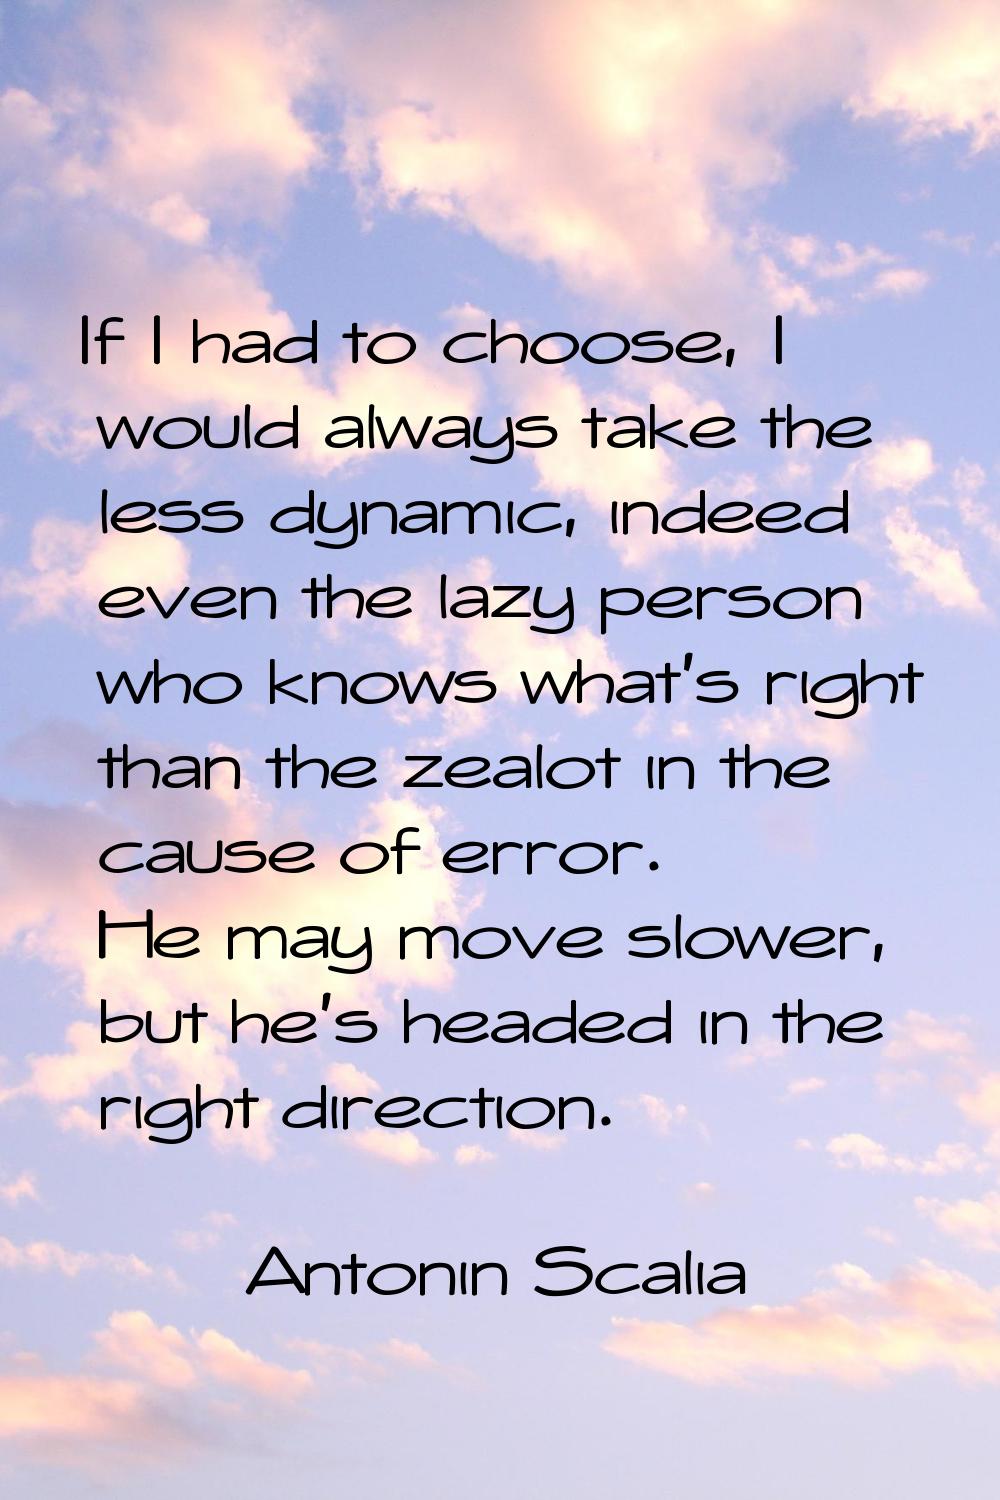 If I had to choose, I would always take the less dynamic, indeed even the lazy person who knows wha